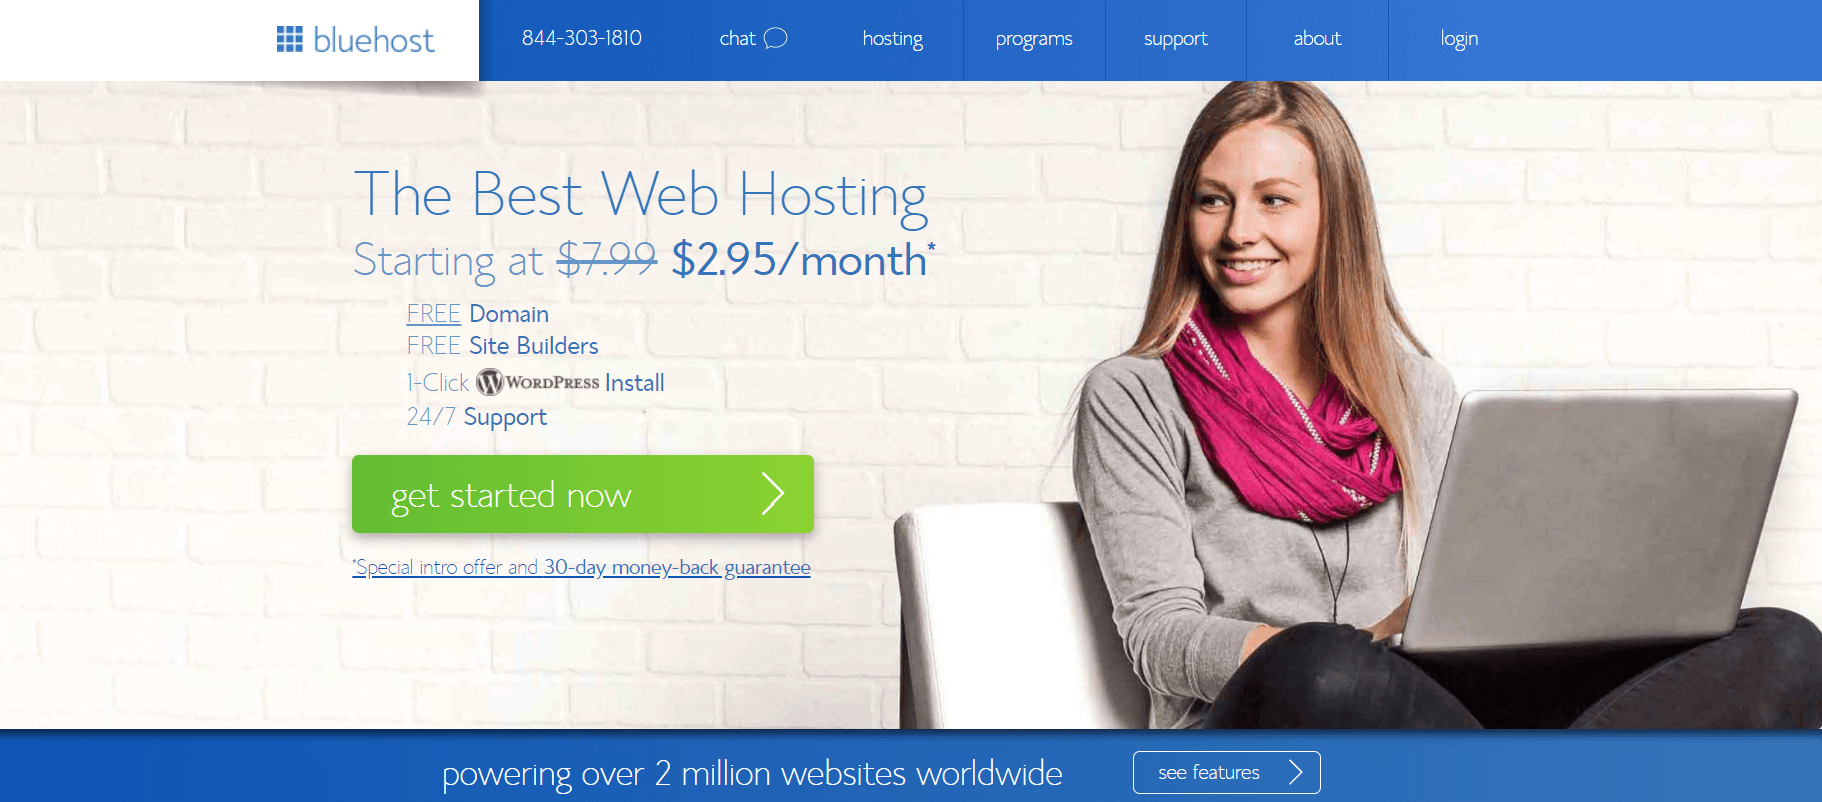 bluehost site